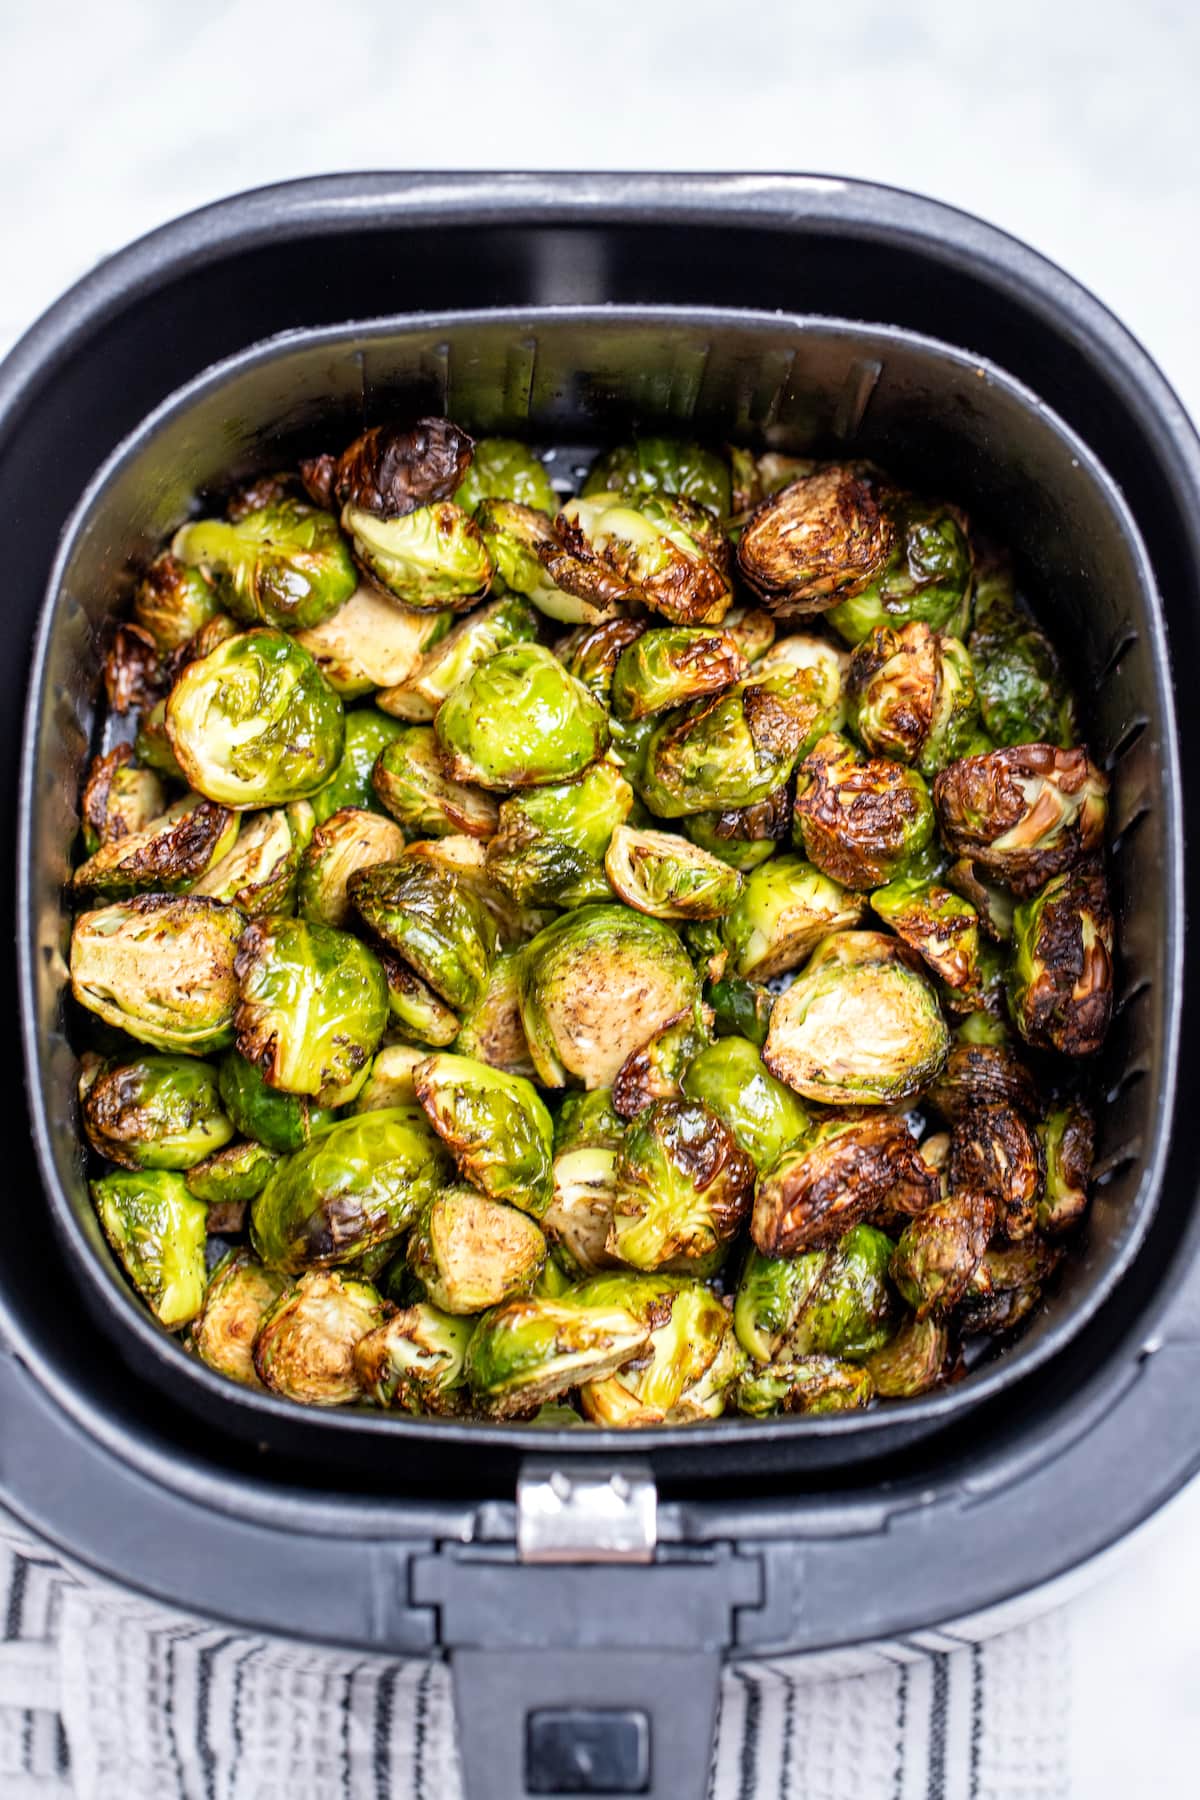 Fully cooked Brussels sprouts in an air fryer basket on a table.